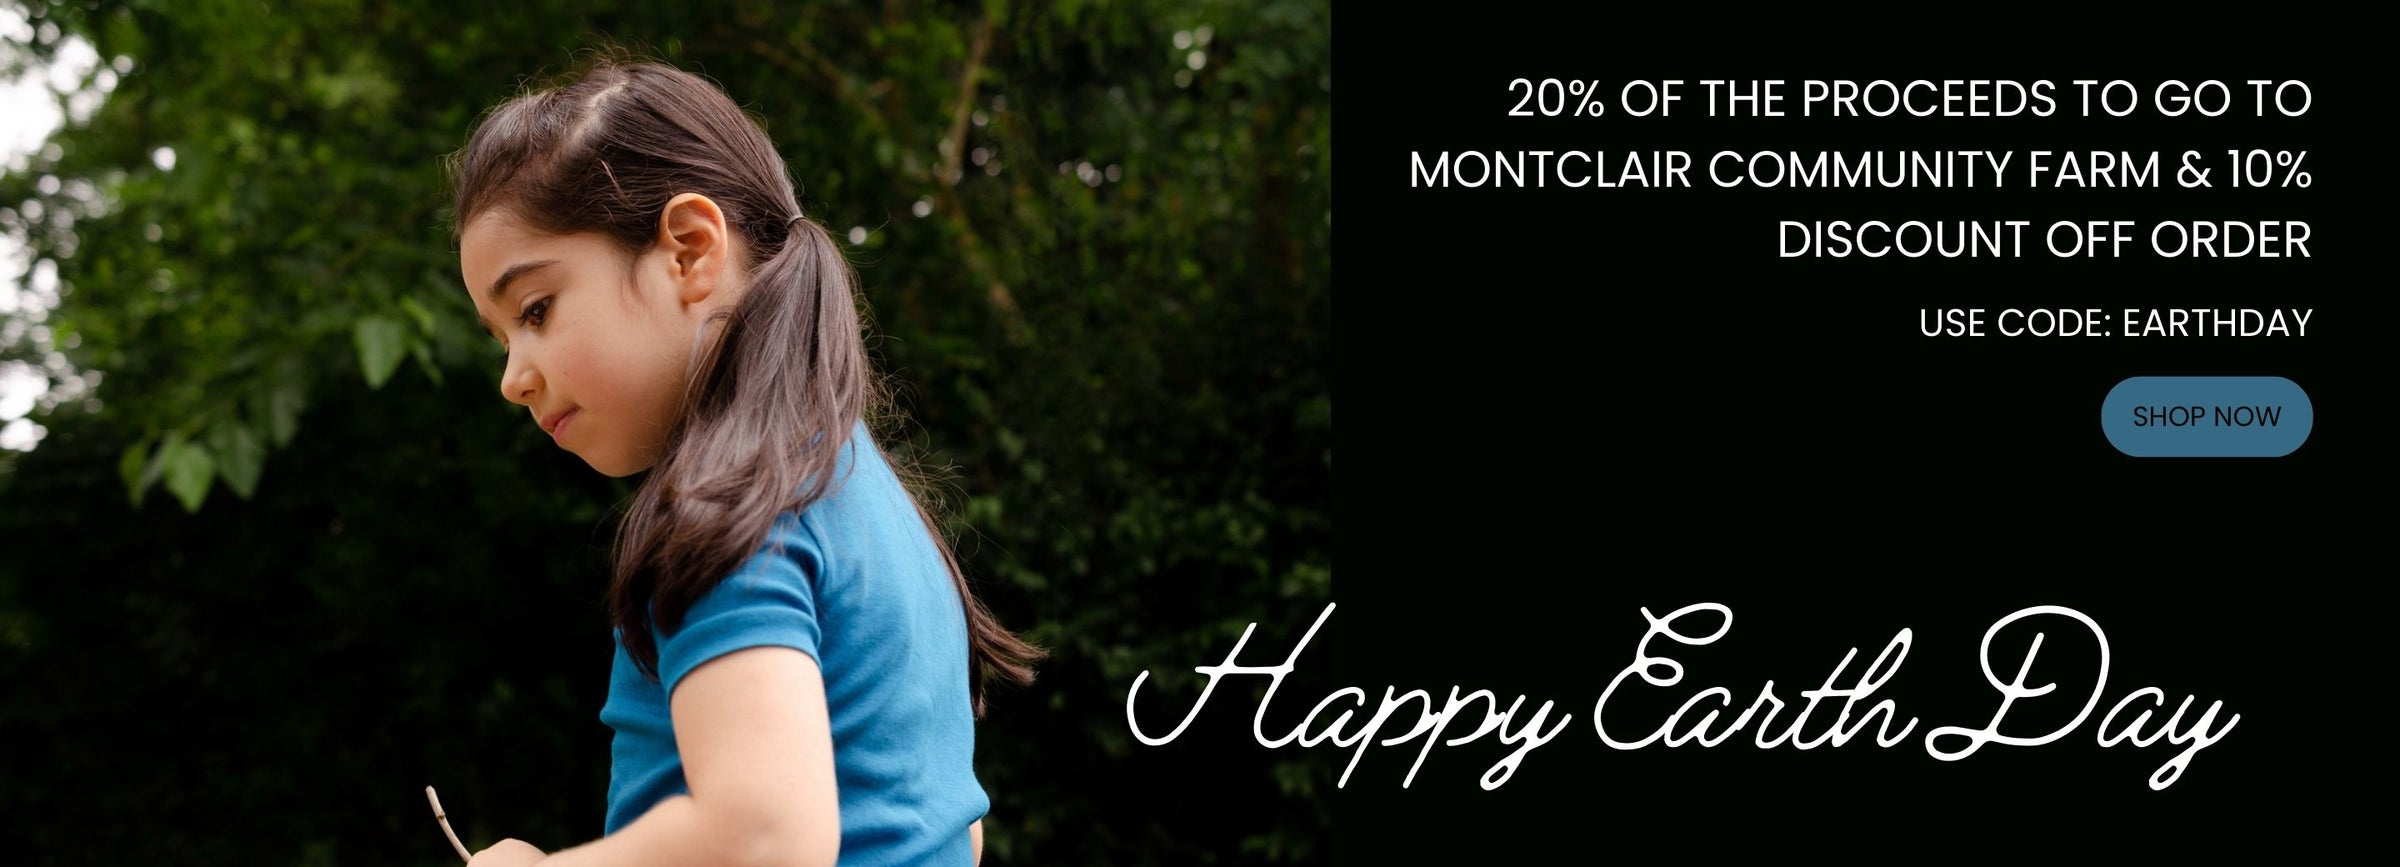 Happy Earth Day! 20% proceeds to go to Montclair Community Farm and 10% discount for customer. Code is EARTHDAY